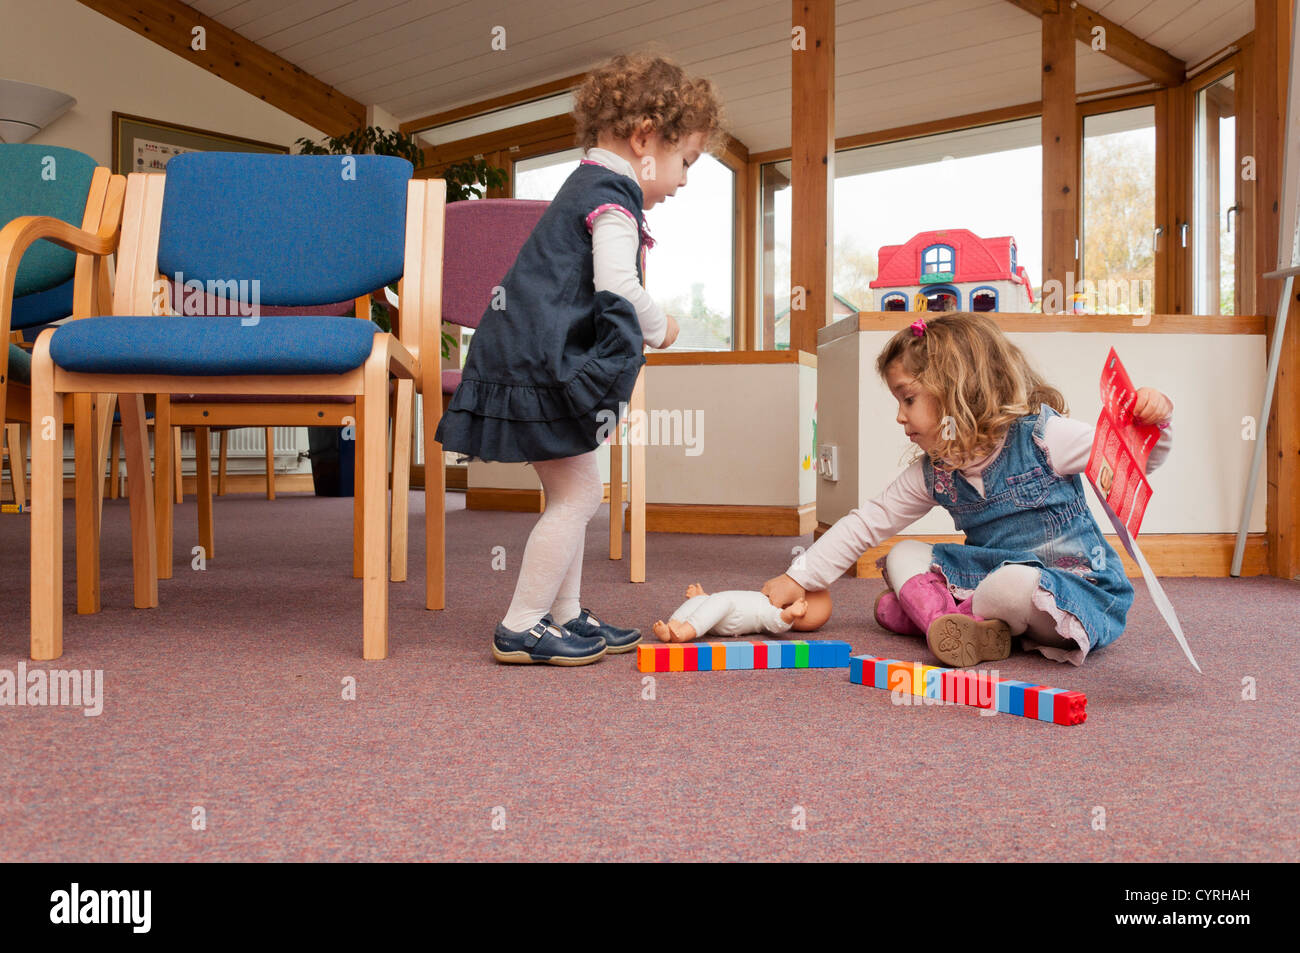 Young children playing with toys in a Doctors surgery waiting area. Stock Photo